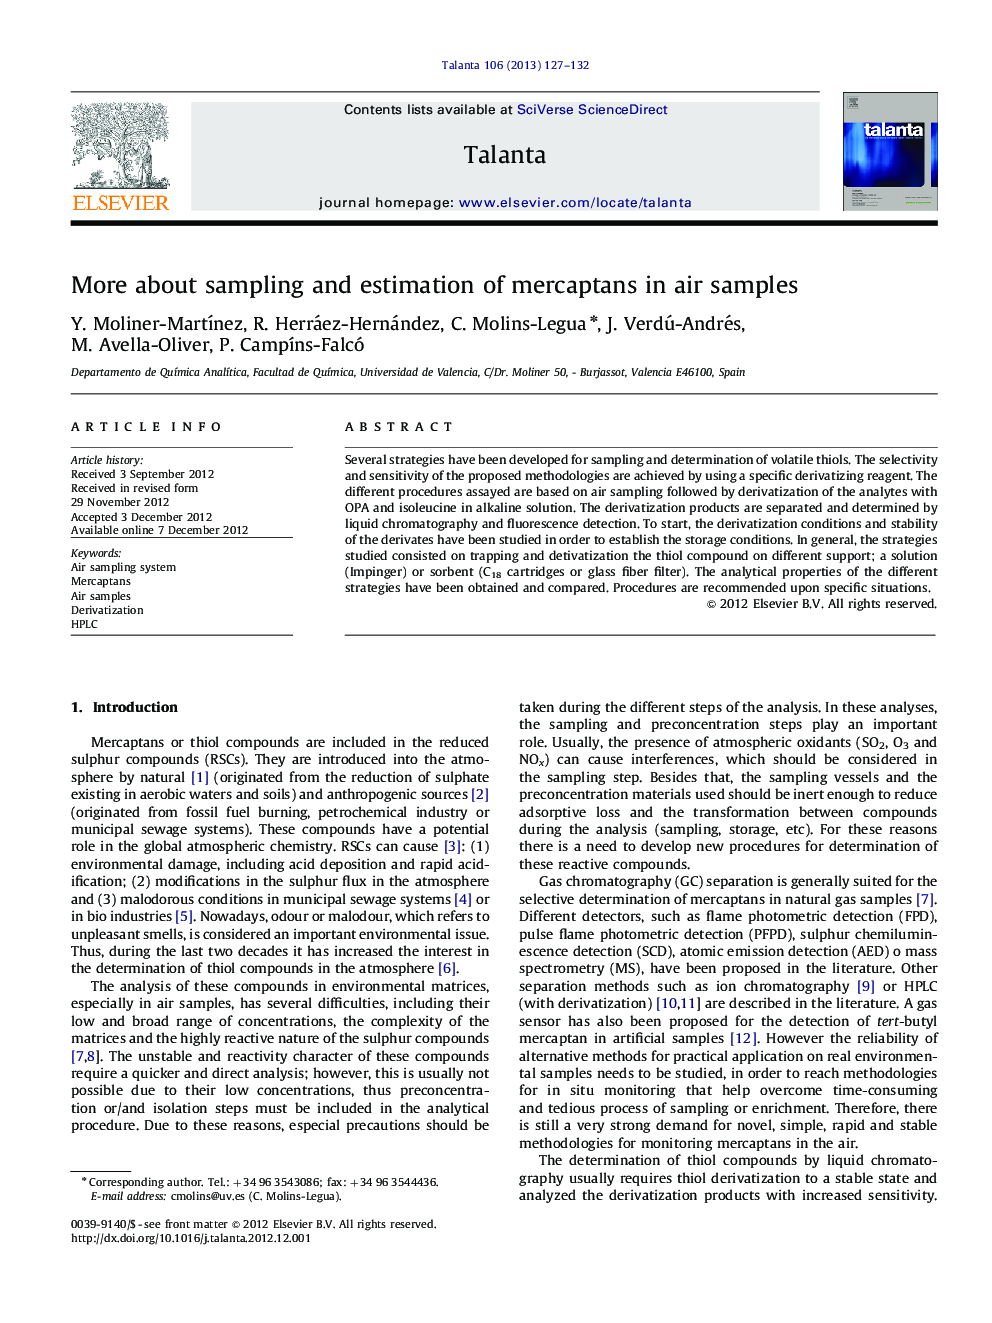 More about sampling and estimation of mercaptans in air samples